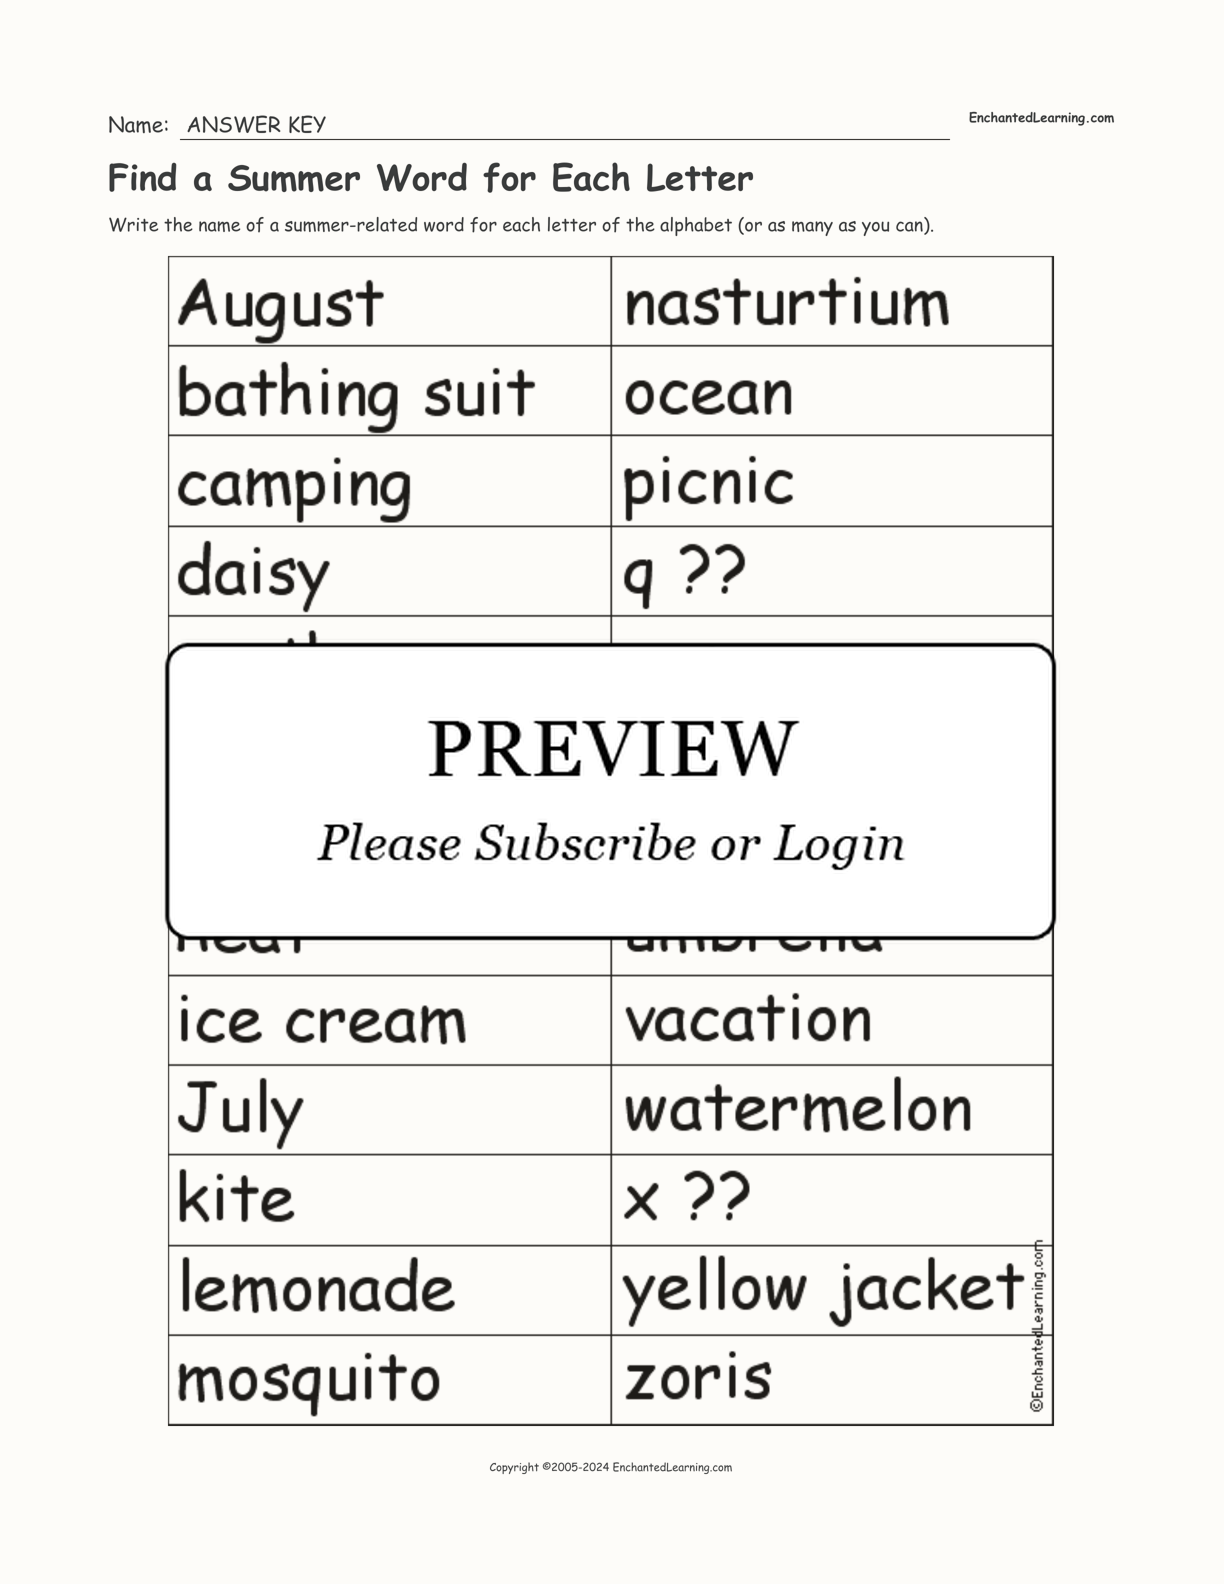 Find a Summer Word for Each Letter interactive worksheet page 2